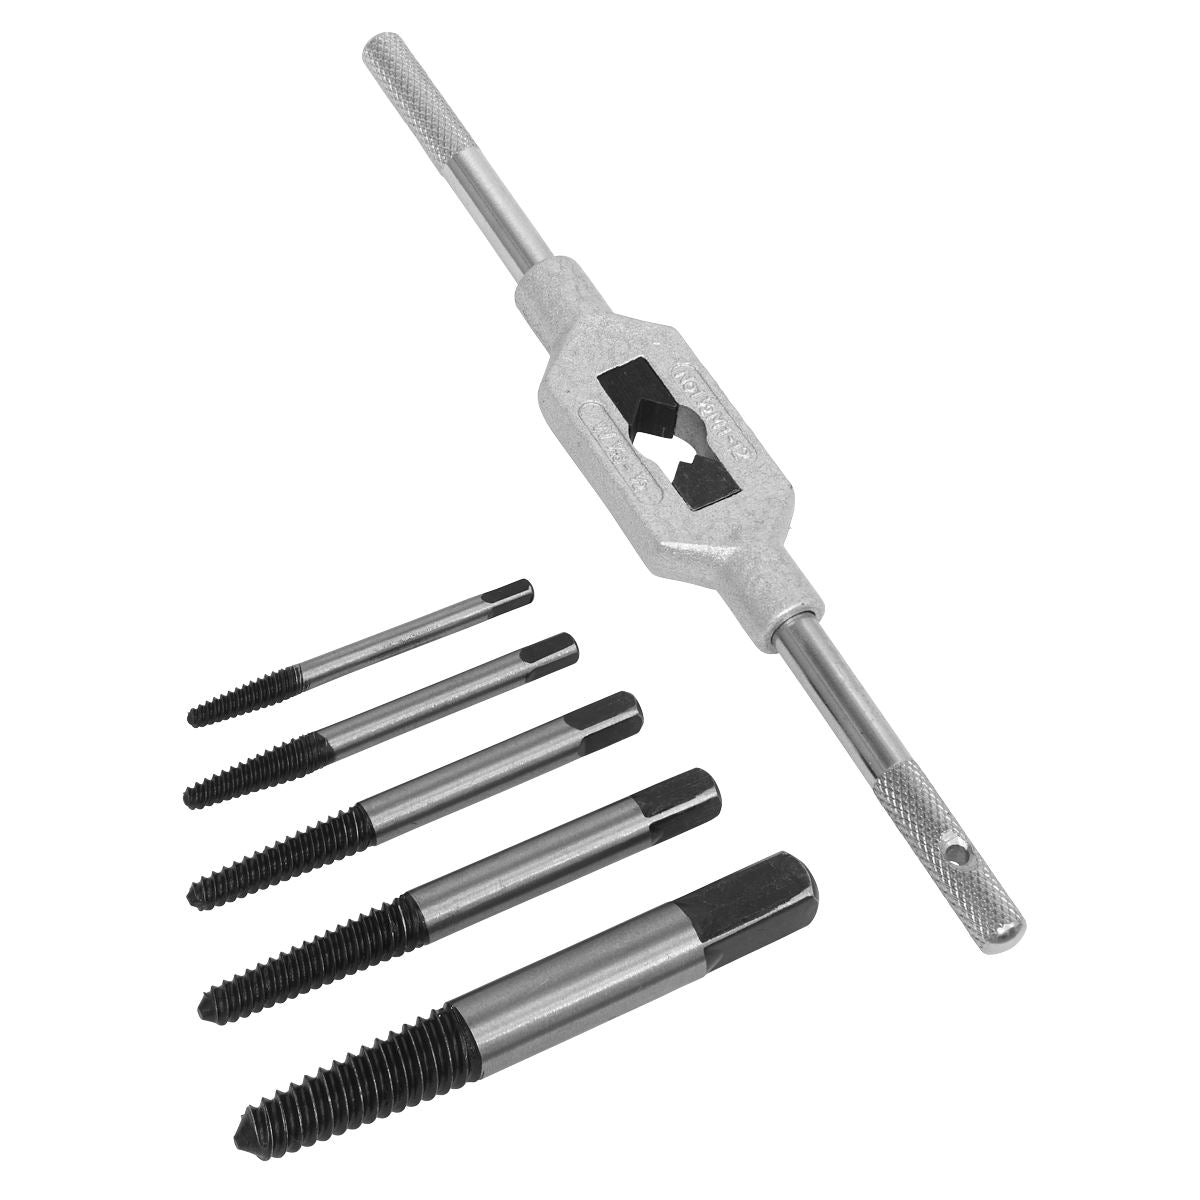 Sealey Screw Extractor Set with Wrench 6pc Helix Type